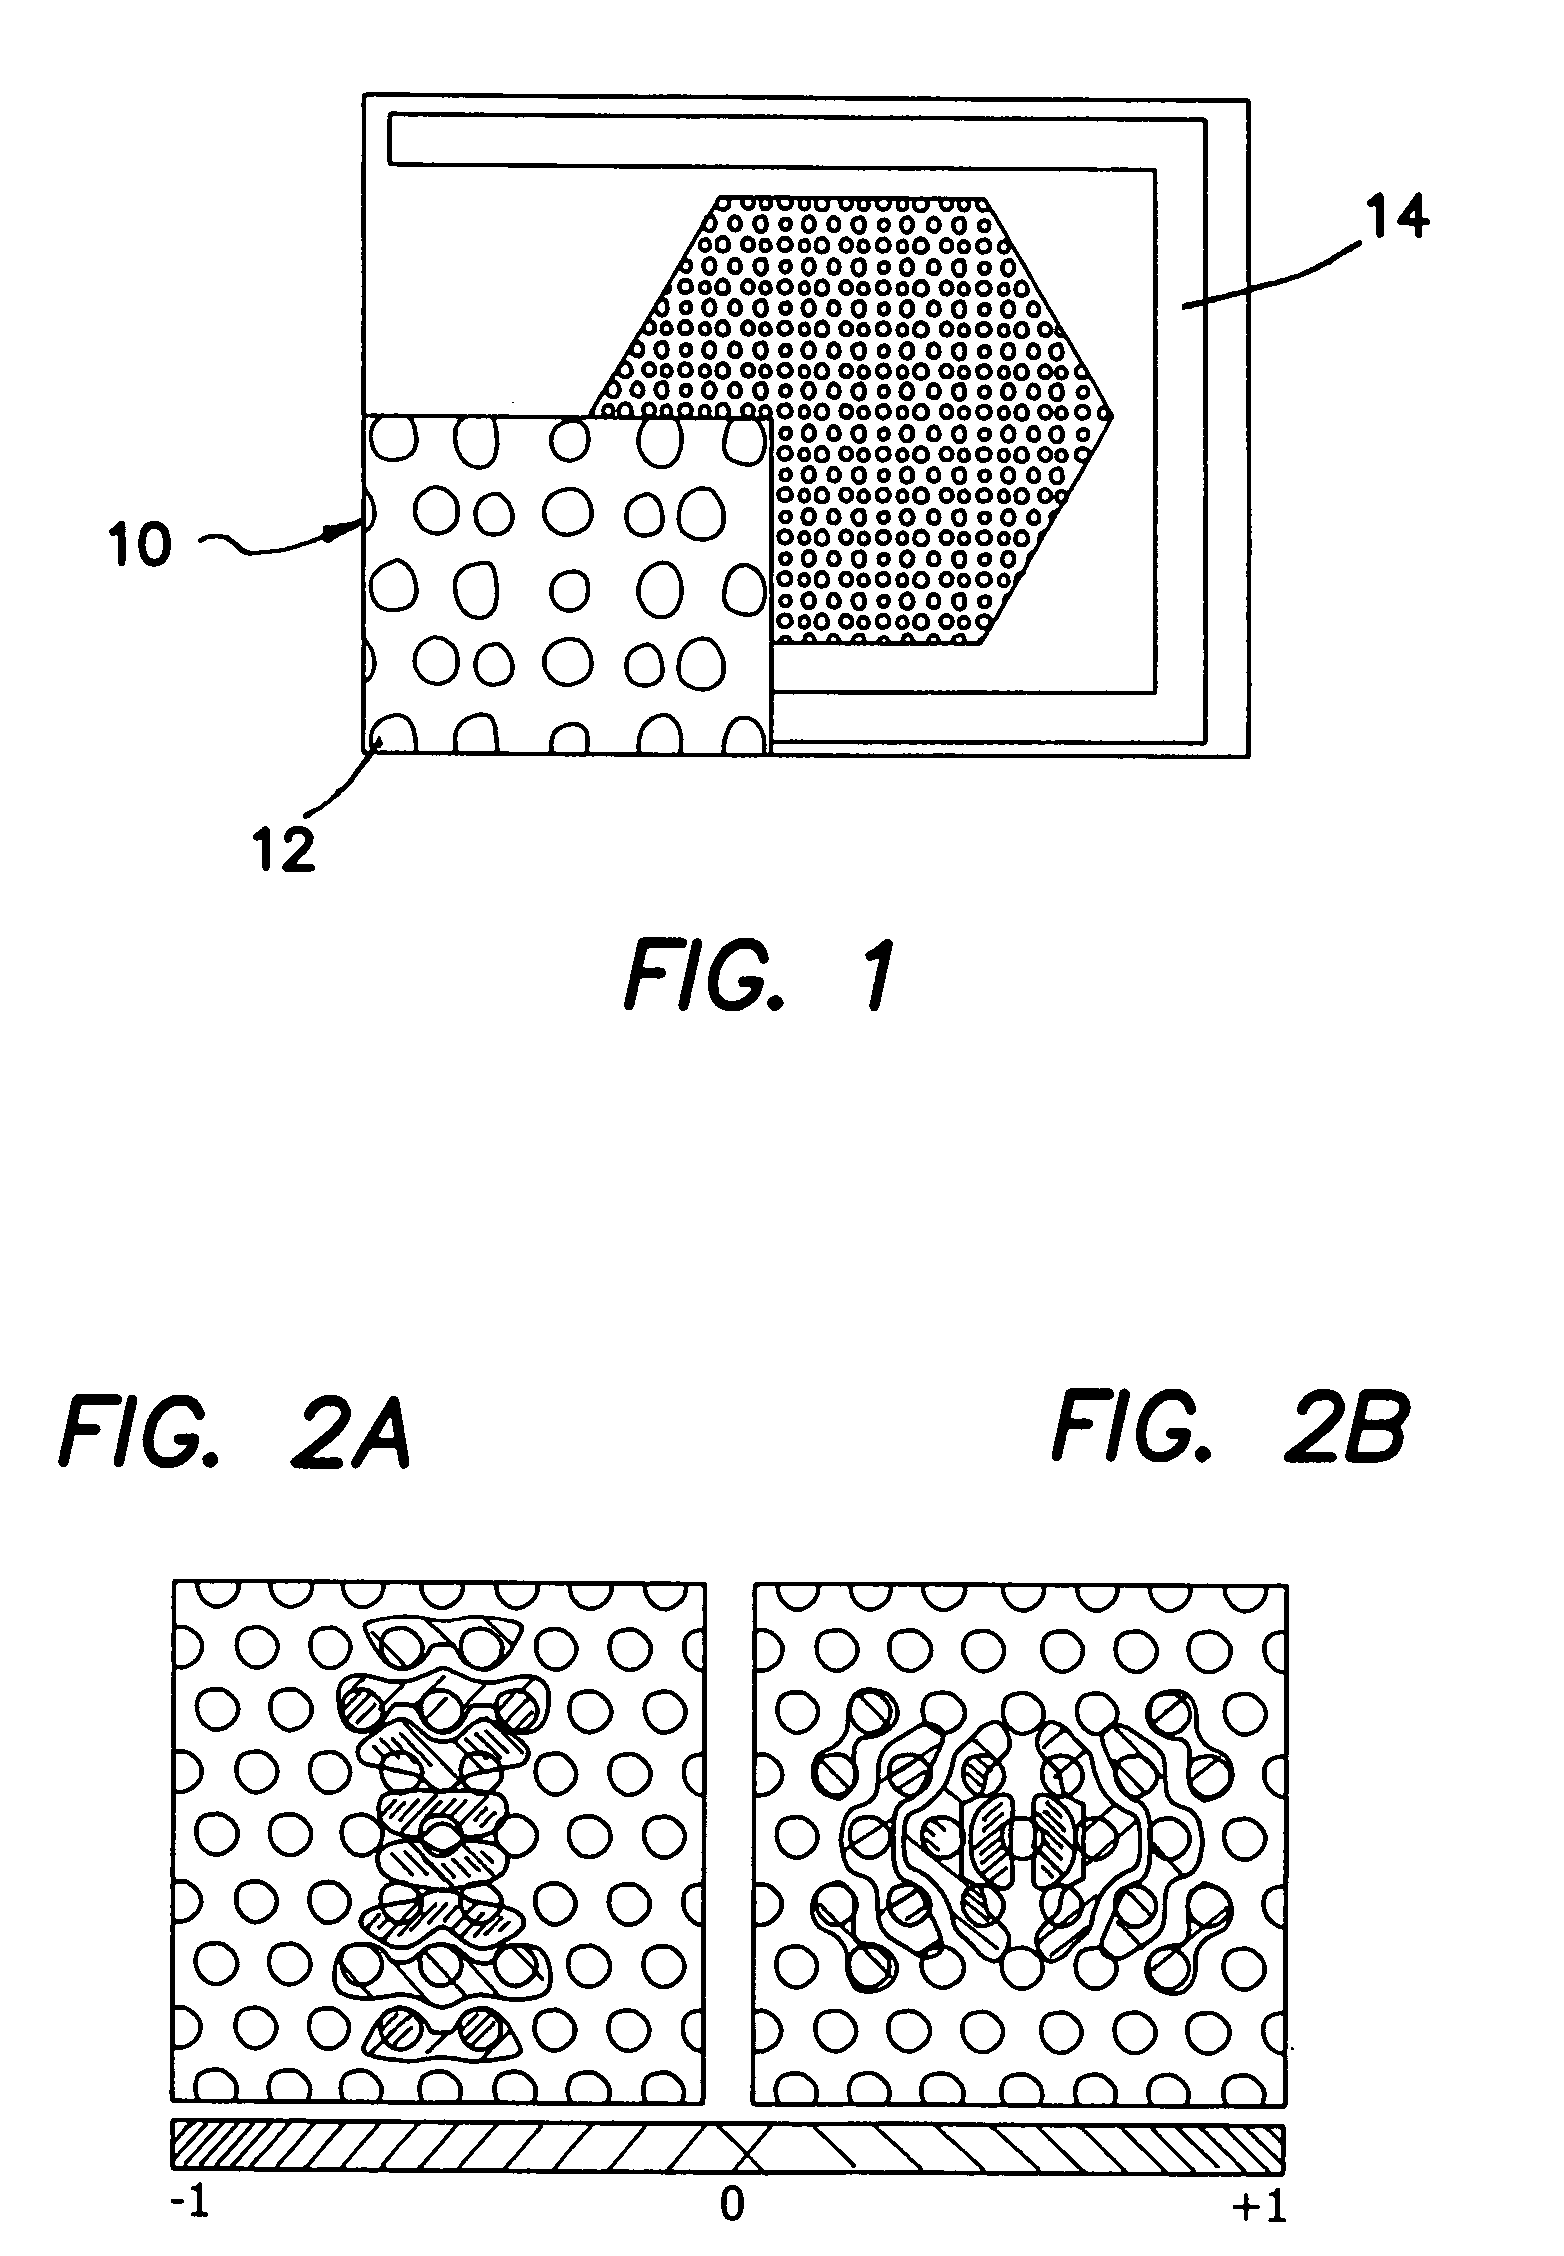 Optically triggered Q-switched photonic crystal laser and method of switching the same